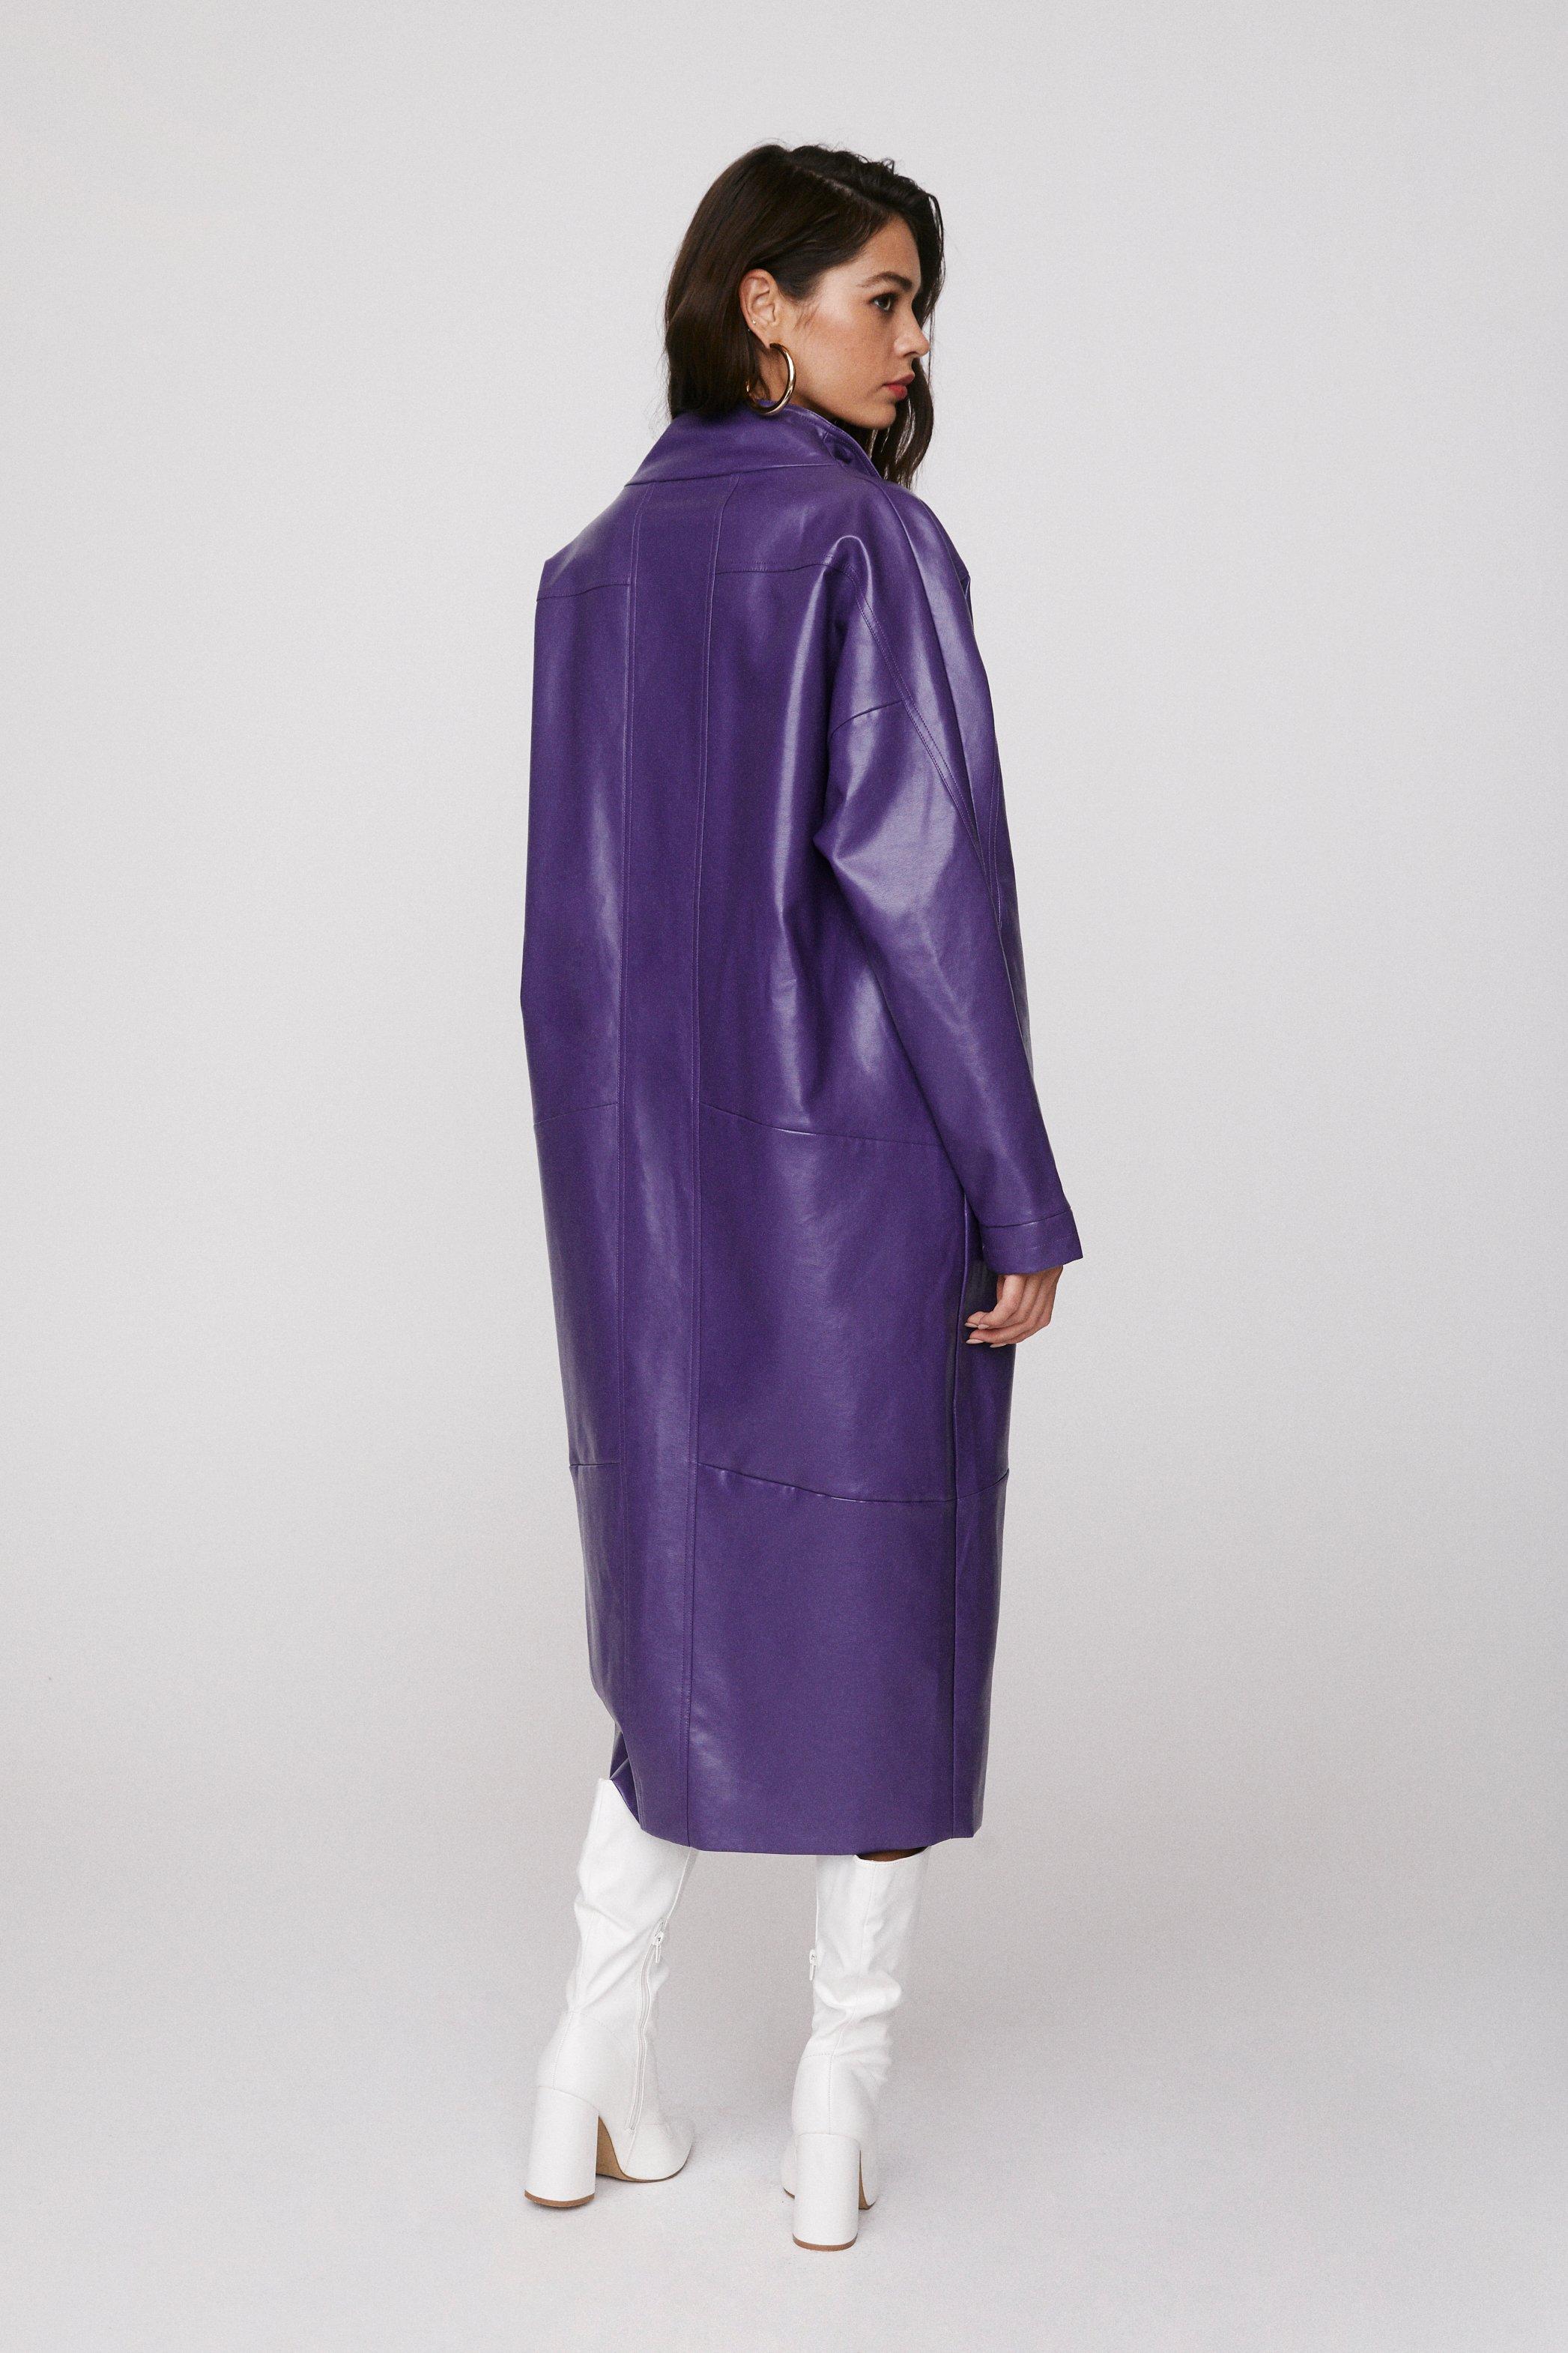 Take The Lead Faux Leather Coat Nasty Gal, Purple Faux Leather